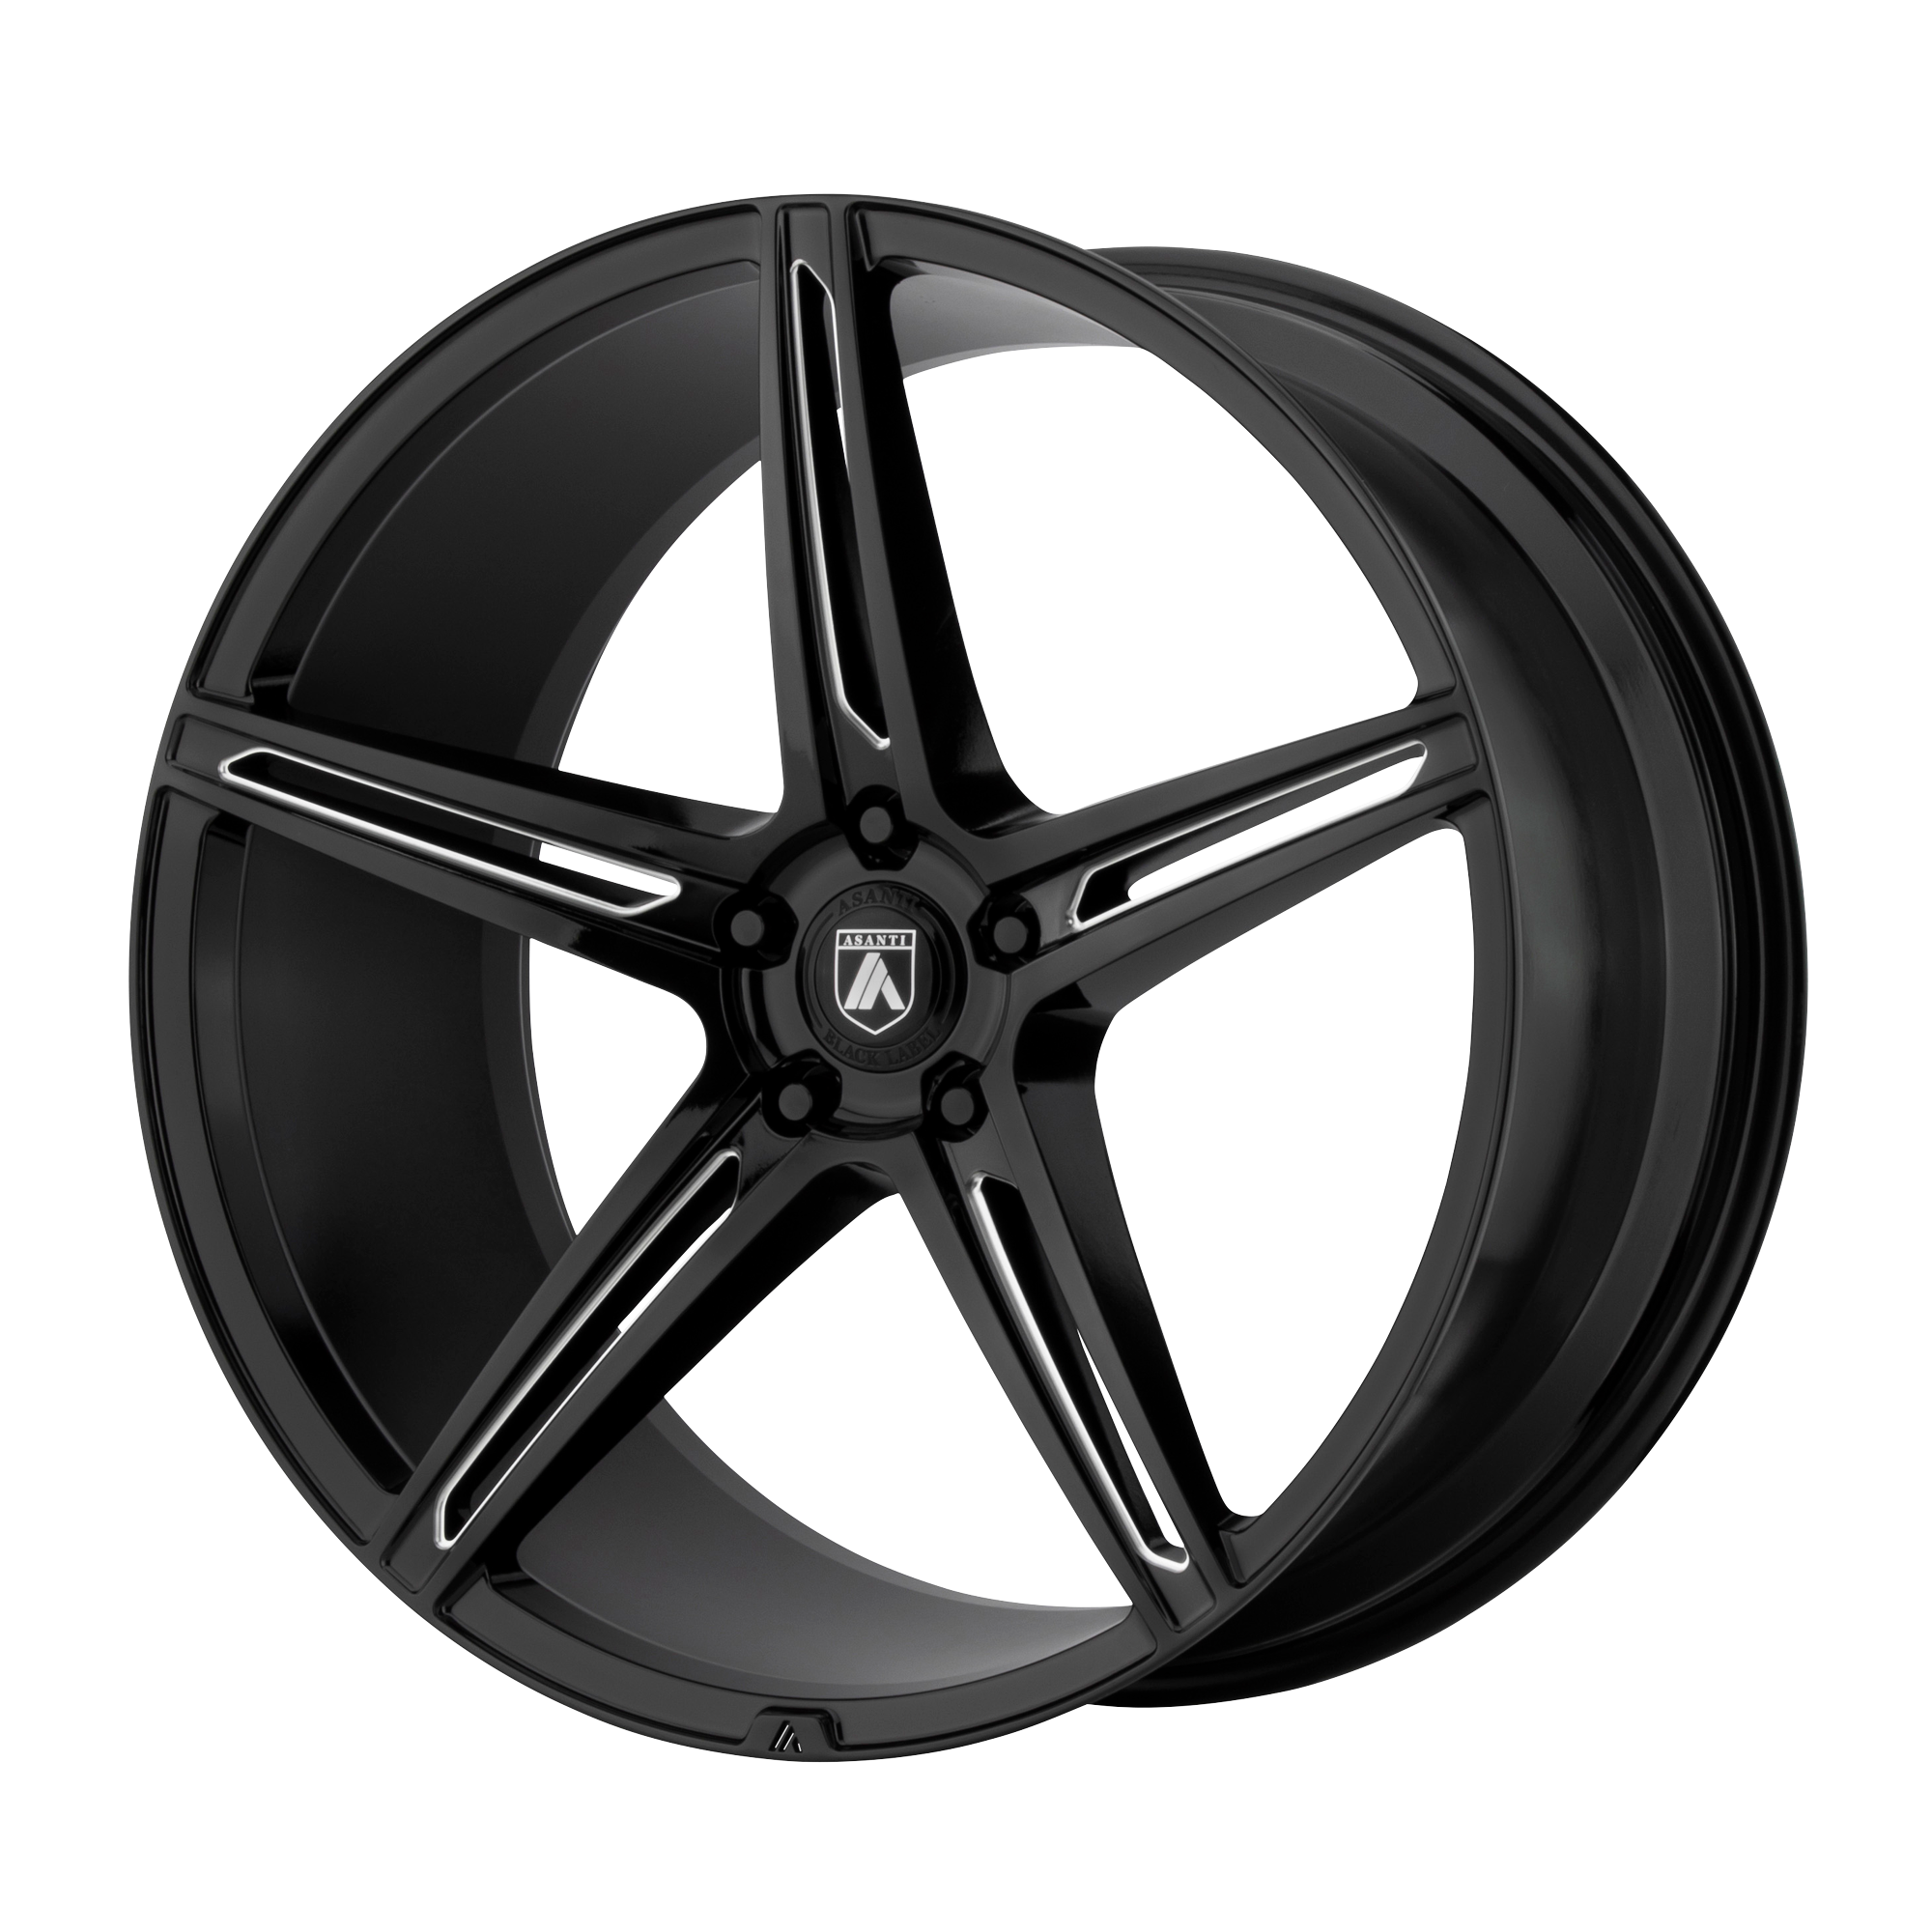 ALPHA 5 20x8.5 5x120.00 GLOSS BLACK MILLED (38 mm) - Tires and Engine Performance